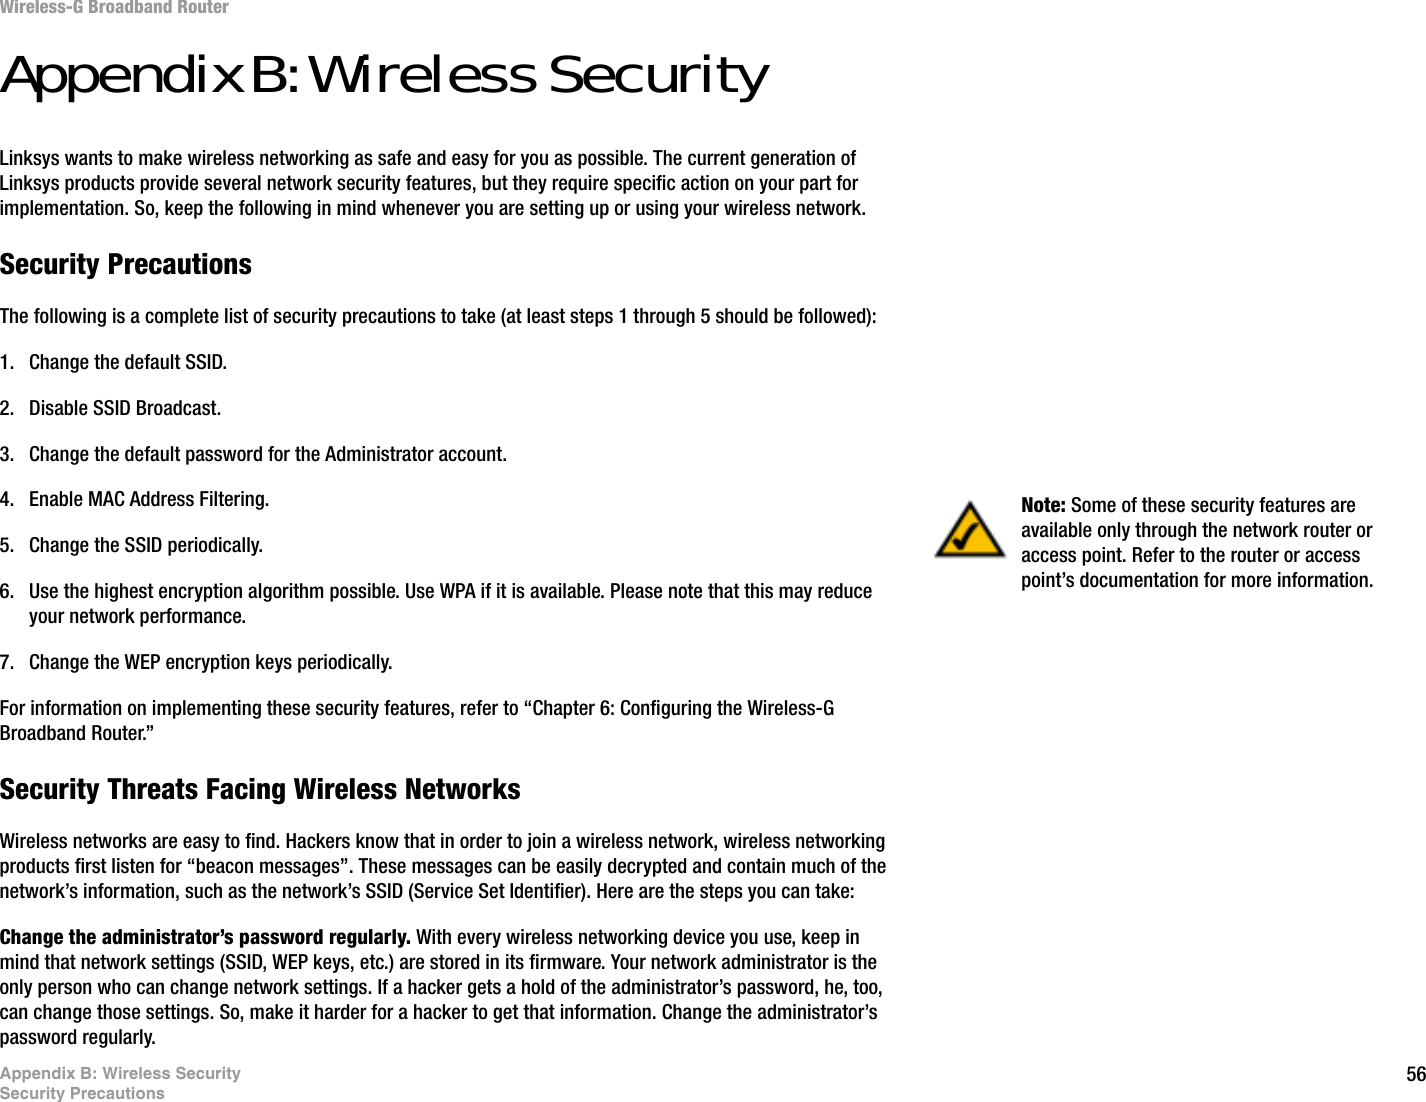 56Appendix B: Wireless SecuritySecurity PrecautionsWireless-G Broadband RouterAppendix B: Wireless SecurityLinksys wants to make wireless networking as safe and easy for you as possible. The current generation of Linksys products provide several network security features, but they require specific action on your part for implementation. So, keep the following in mind whenever you are setting up or using your wireless network.Security PrecautionsThe following is a complete list of security precautions to take (at least steps 1 through 5 should be followed):1. Change the default SSID. 2. Disable SSID Broadcast. 3. Change the default password for the Administrator account. 4. Enable MAC Address Filtering. 5. Change the SSID periodically. 6. Use the highest encryption algorithm possible. Use WPA if it is available. Please note that this may reduce your network performance. 7. Change the WEP encryption keys periodically. For information on implementing these security features, refer to “Chapter 6: Configuring the Wireless-G Broadband Router.”Security Threats Facing Wireless Networks Wireless networks are easy to find. Hackers know that in order to join a wireless network, wireless networking products first listen for “beacon messages”. These messages can be easily decrypted and contain much of the network’s information, such as the network’s SSID (Service Set Identifier). Here are the steps you can take:Change the administrator’s password regularly. With every wireless networking device you use, keep in mind that network settings (SSID, WEP keys, etc.) are stored in its firmware. Your network administrator is the only person who can change network settings. If a hacker gets a hold of the administrator’s password, he, too, can change those settings. So, make it harder for a hacker to get that information. Change the administrator’s password regularly.Note: Some of these security features are available only through the network router or access point. Refer to the router or access point’s documentation for more information.